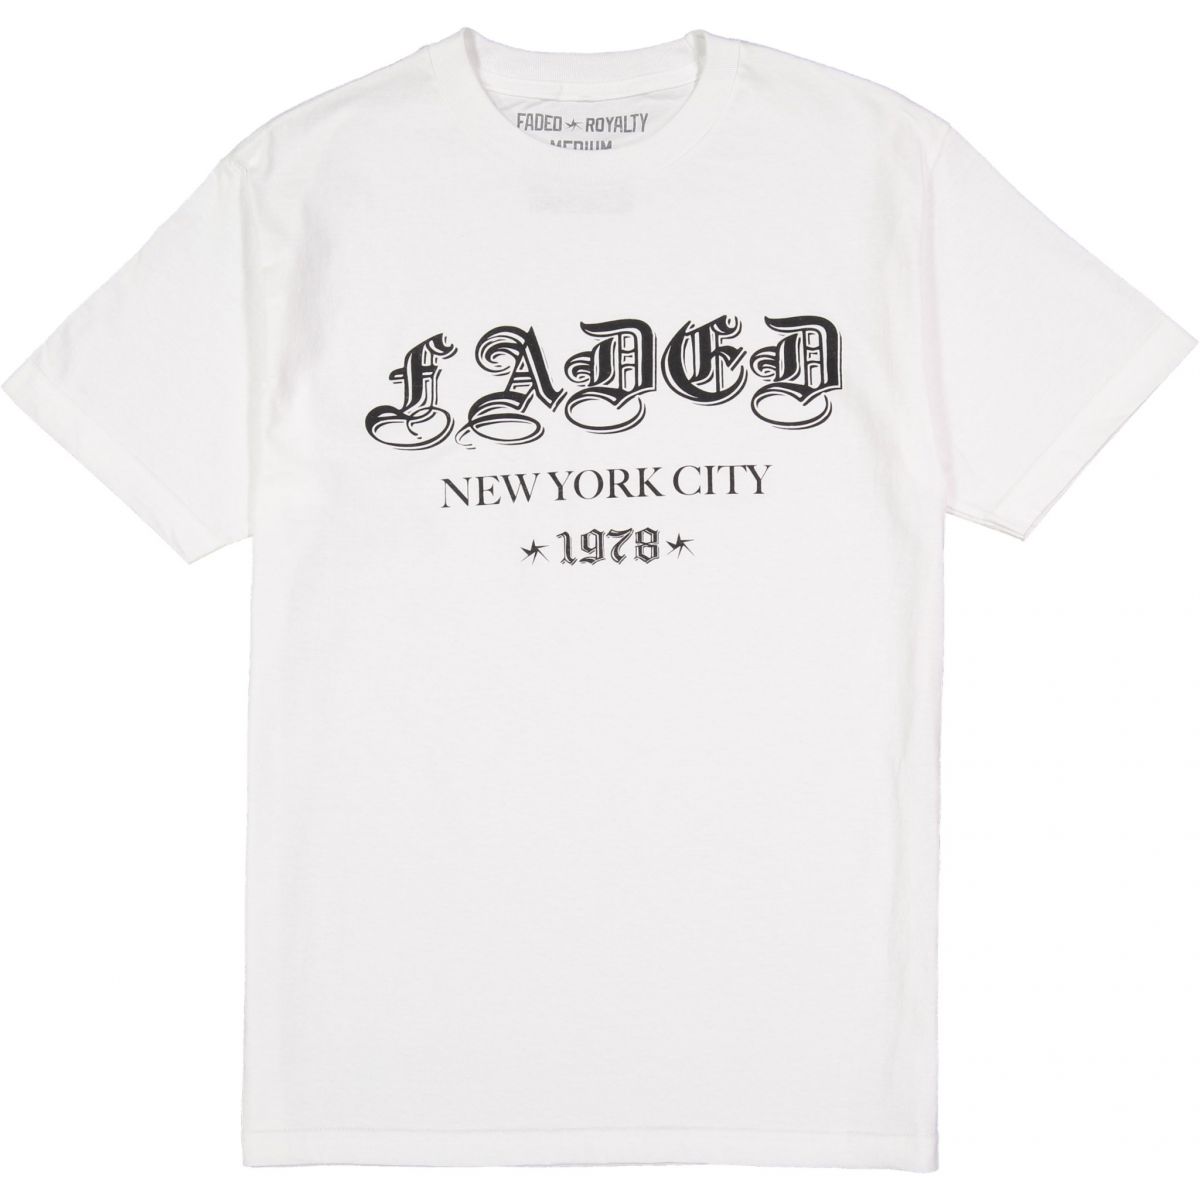 FADED ROYALTY FADED OLD E FR-2019-1019 - Karmaloop